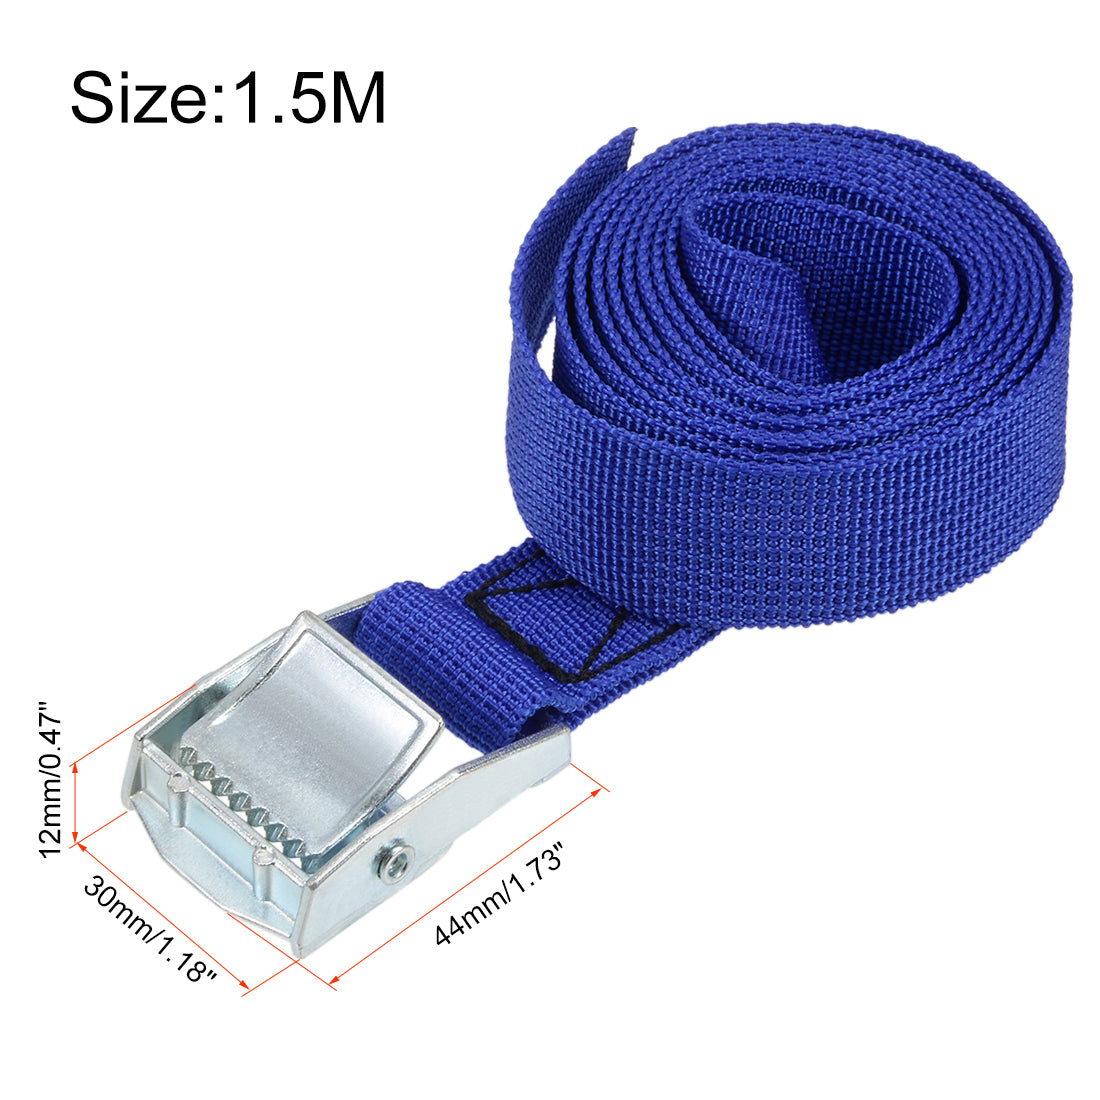 uxcell Uxcell 1.5M x 25mm Lashing Strap Cargo Tie Down Straps w Cam Lock Buckle 250Kg Work Load, Blue, 4Pcs